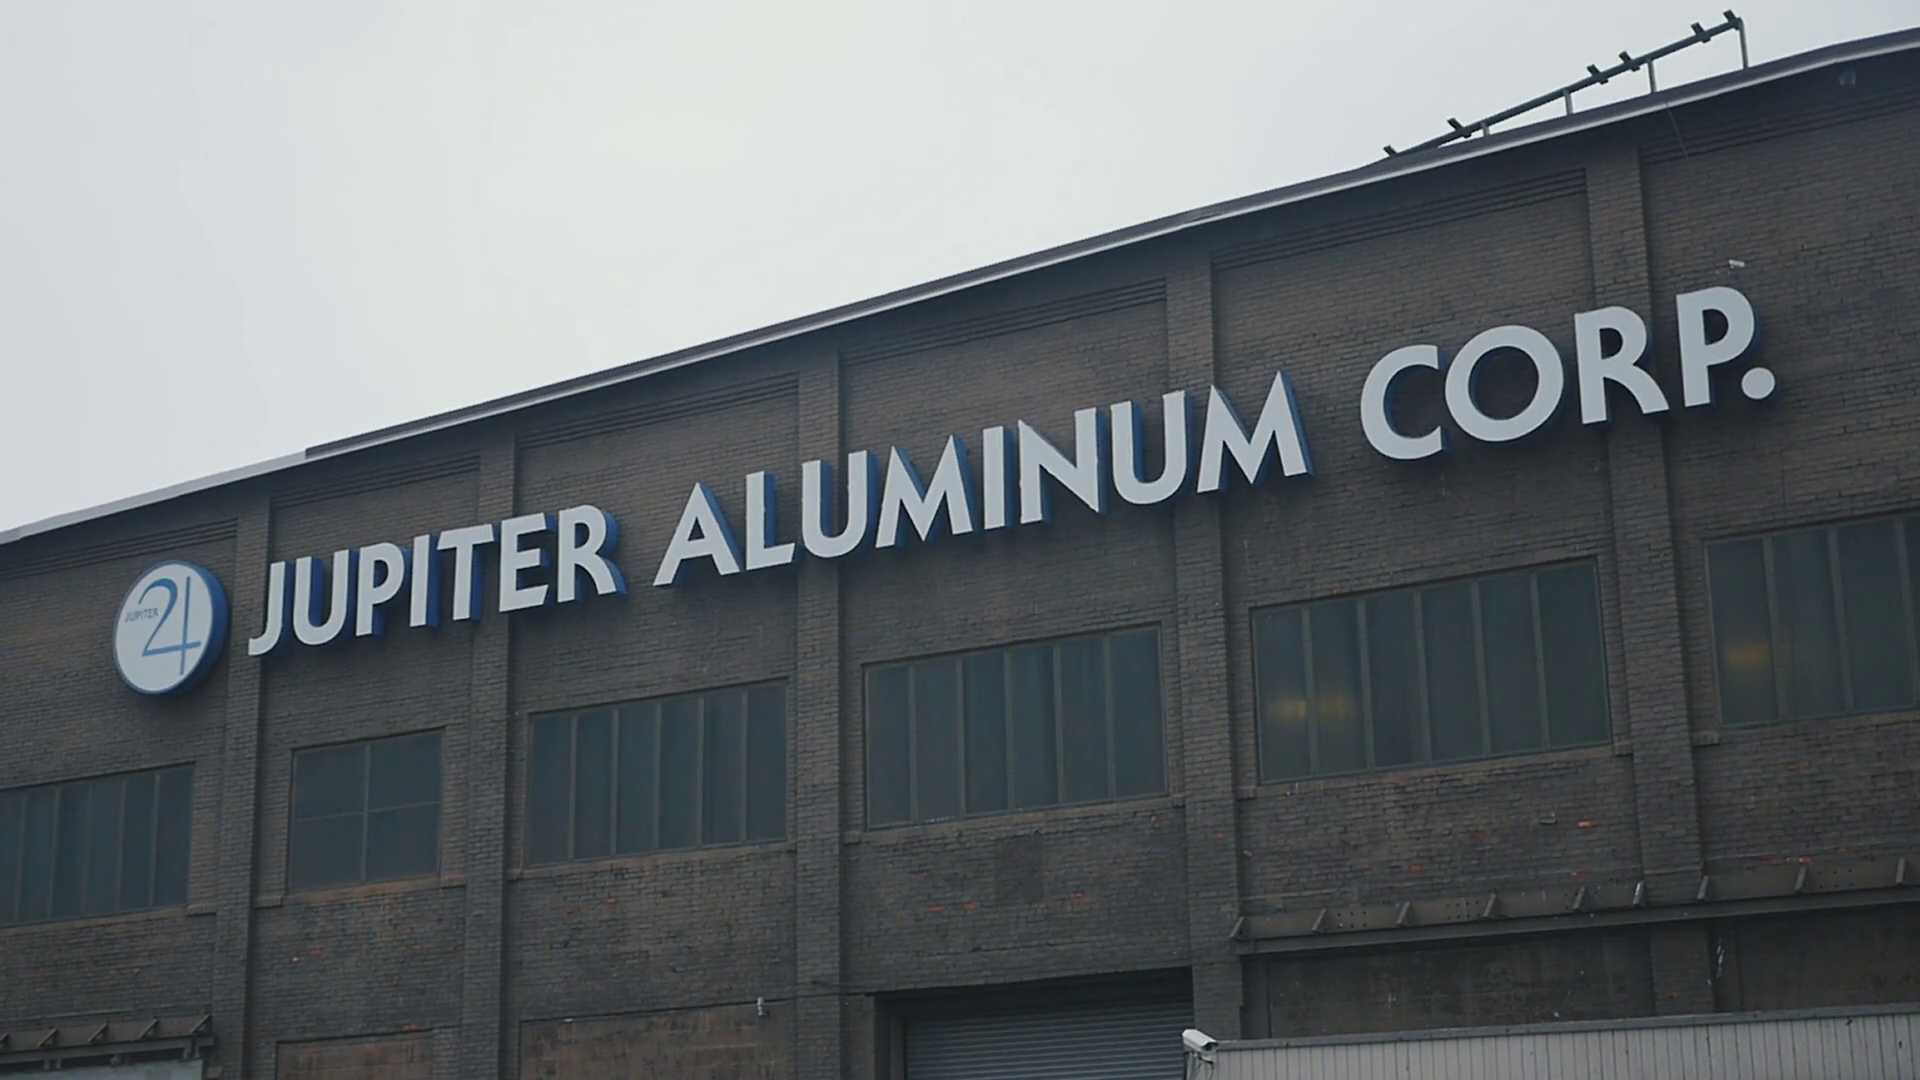 Brooke County’s Jupiter Aluminum suffers major fire outbreak at its recycling unit; workers are safe